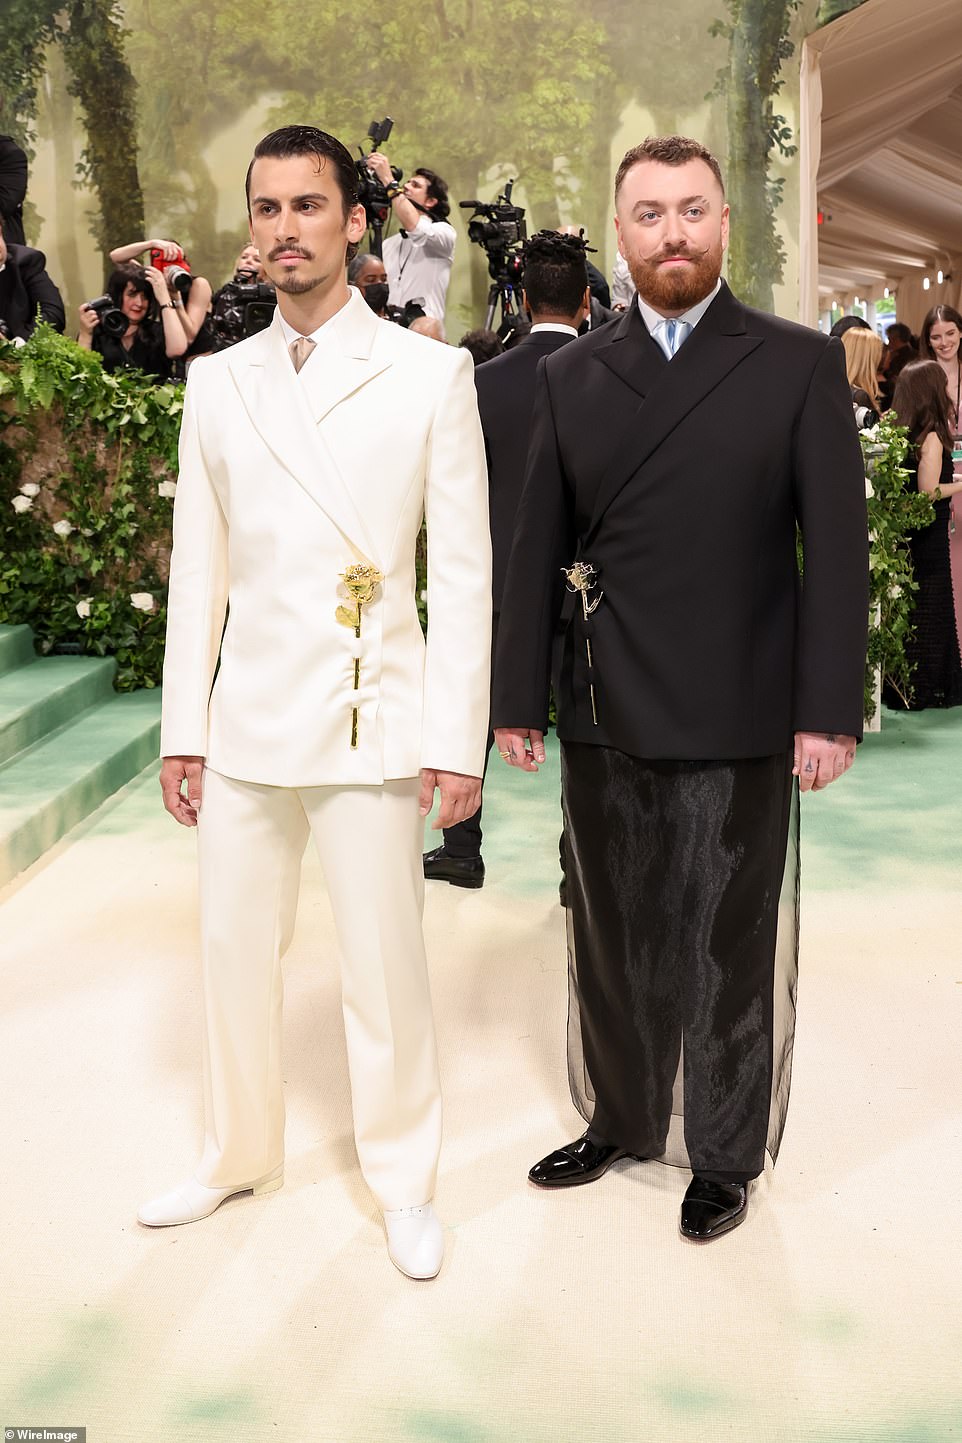 Sam Smith donned a striking black look while Christian Cowan wore a crisp white look